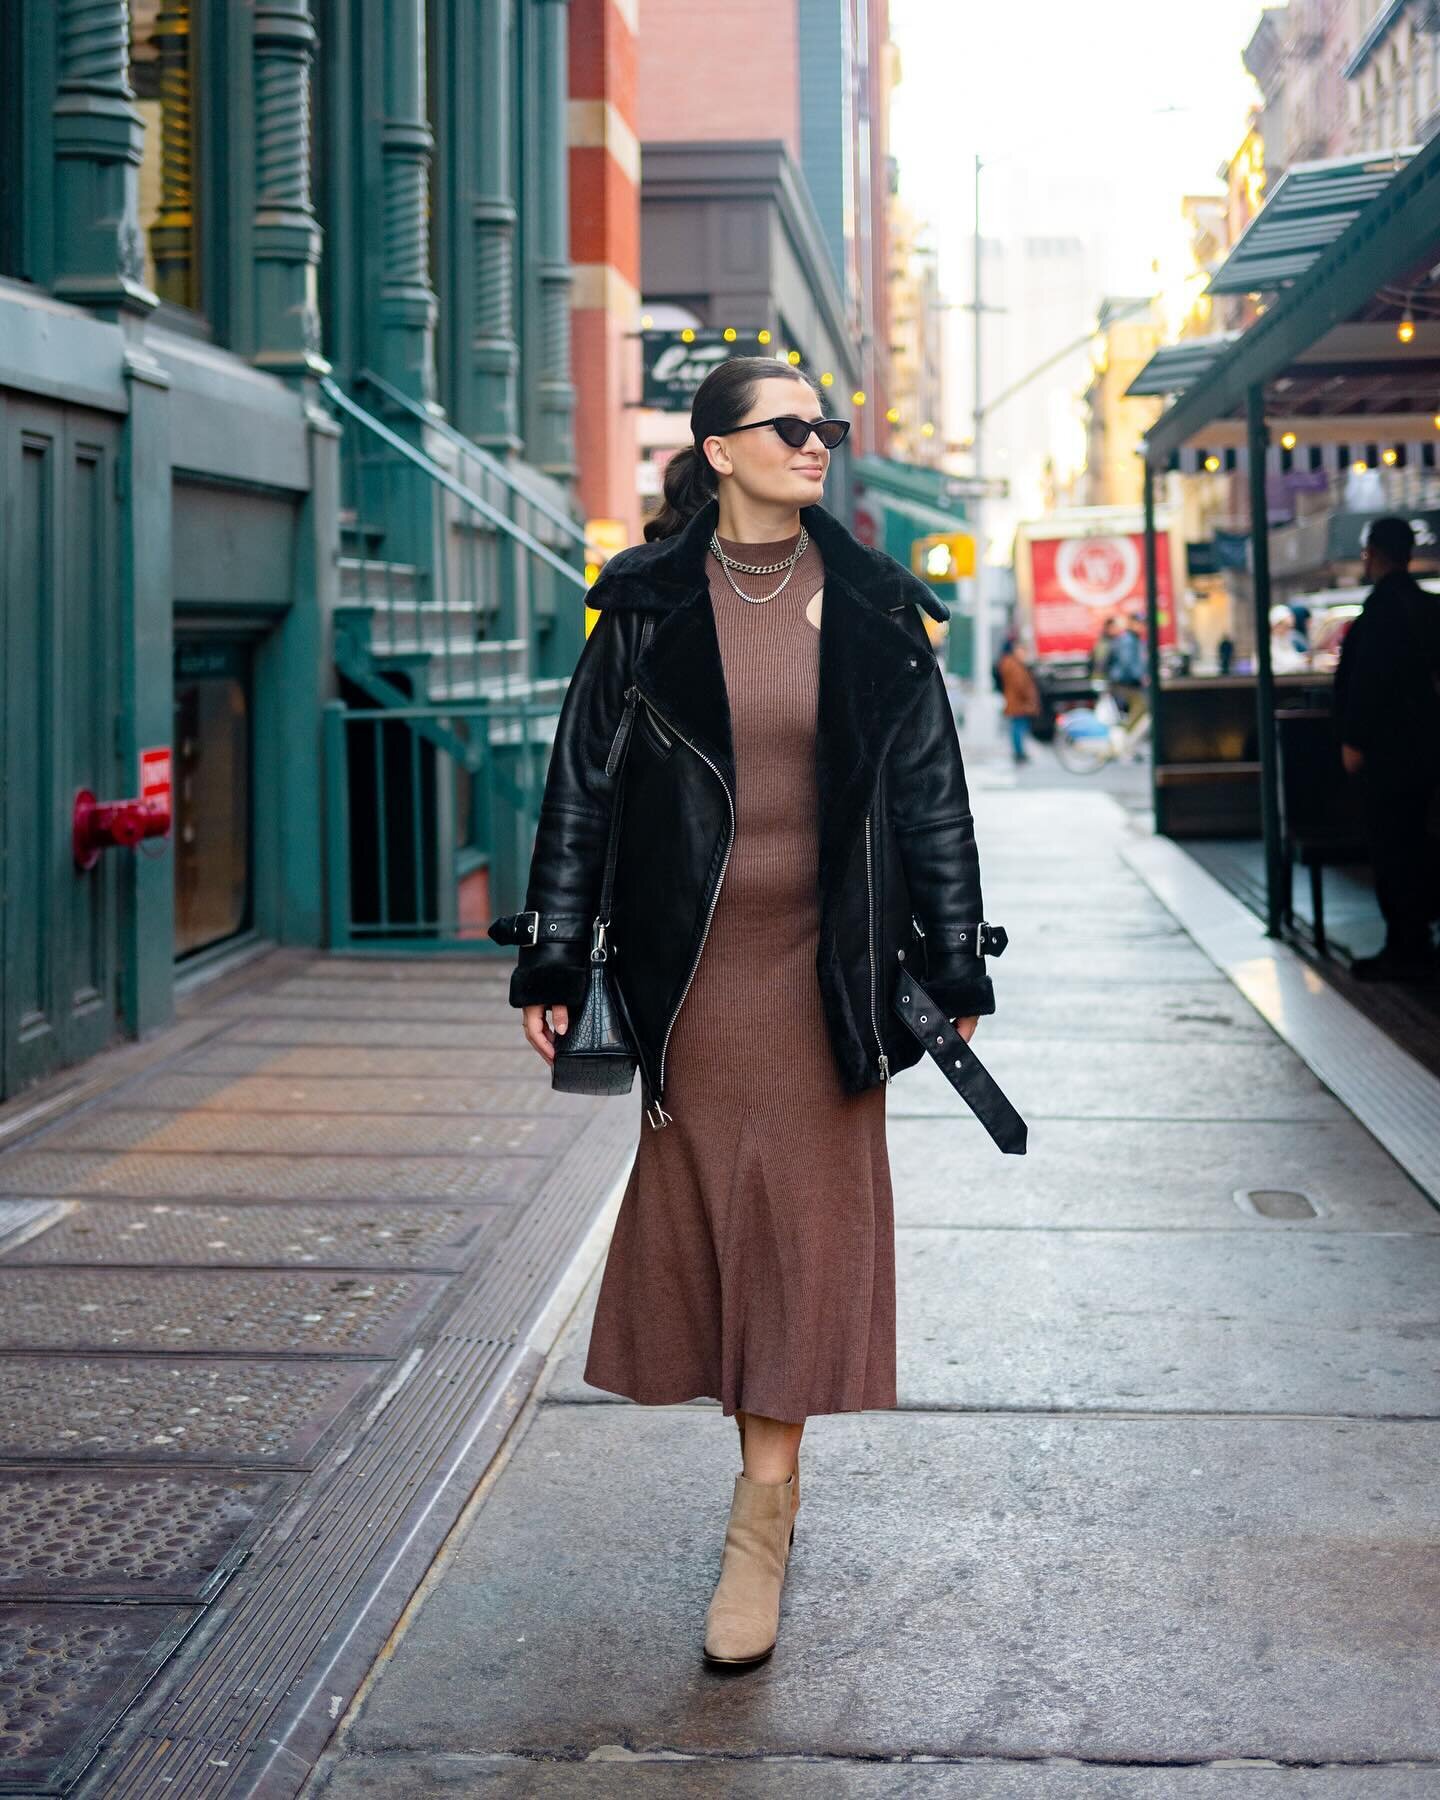 Spotted in SoHo: a brunette in brown 🤎👜🧸

We all know I love a colorful outfit but something has been calling me towards the neutrals lately 🧥

Shop this look on LTK 🤍 liketk.it/4wjz6
📸 @karyastreetstyle 

#stylebyausten #streetstyle #newyorkfa